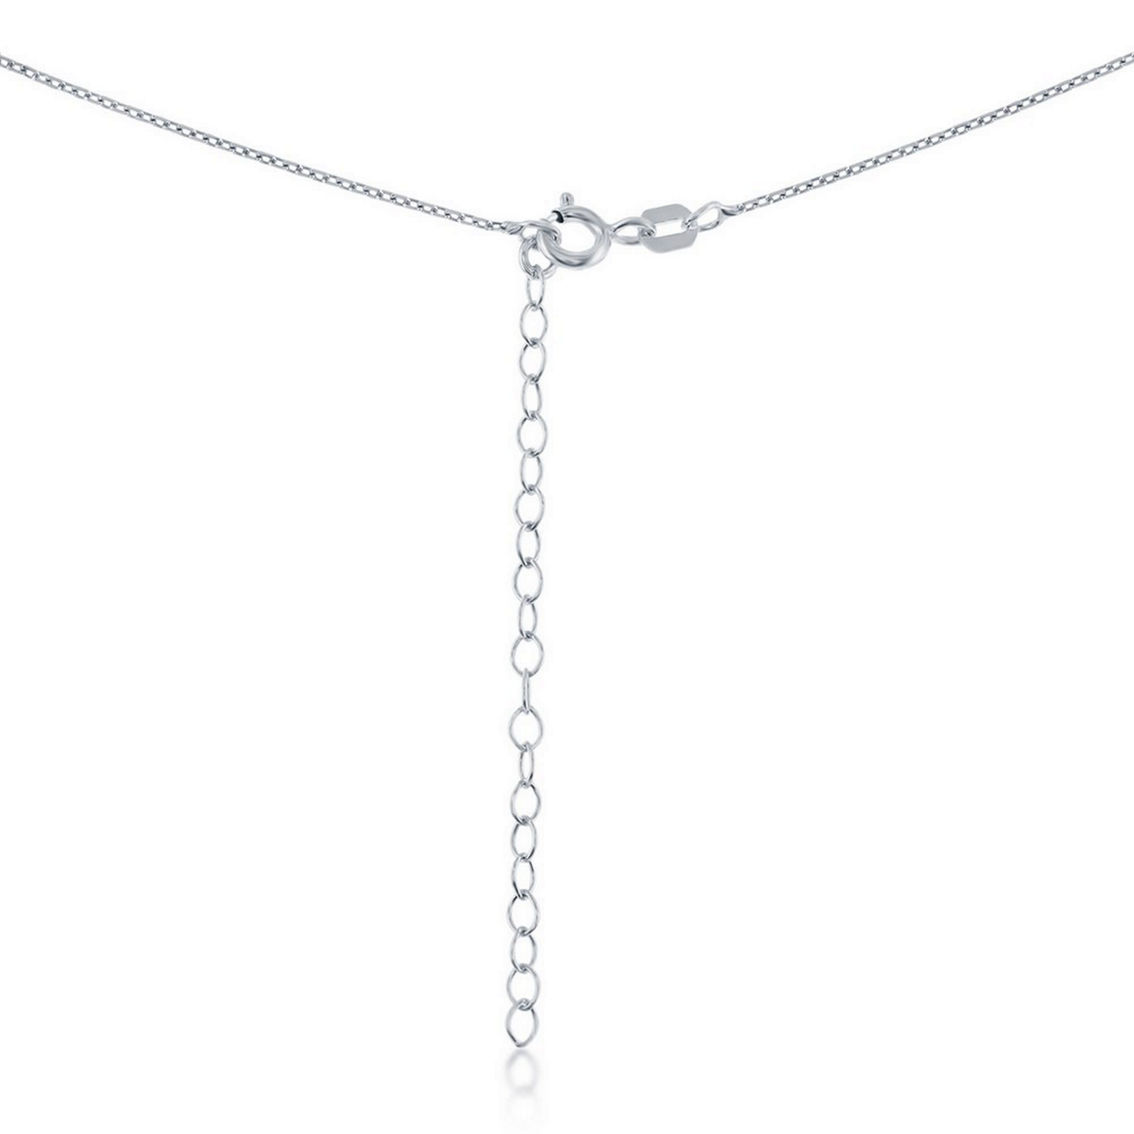 Links of Italy Sterling Silver 1.4mm Diamond-Cut Cable Chain - Rhodium Plated - Image 2 of 3